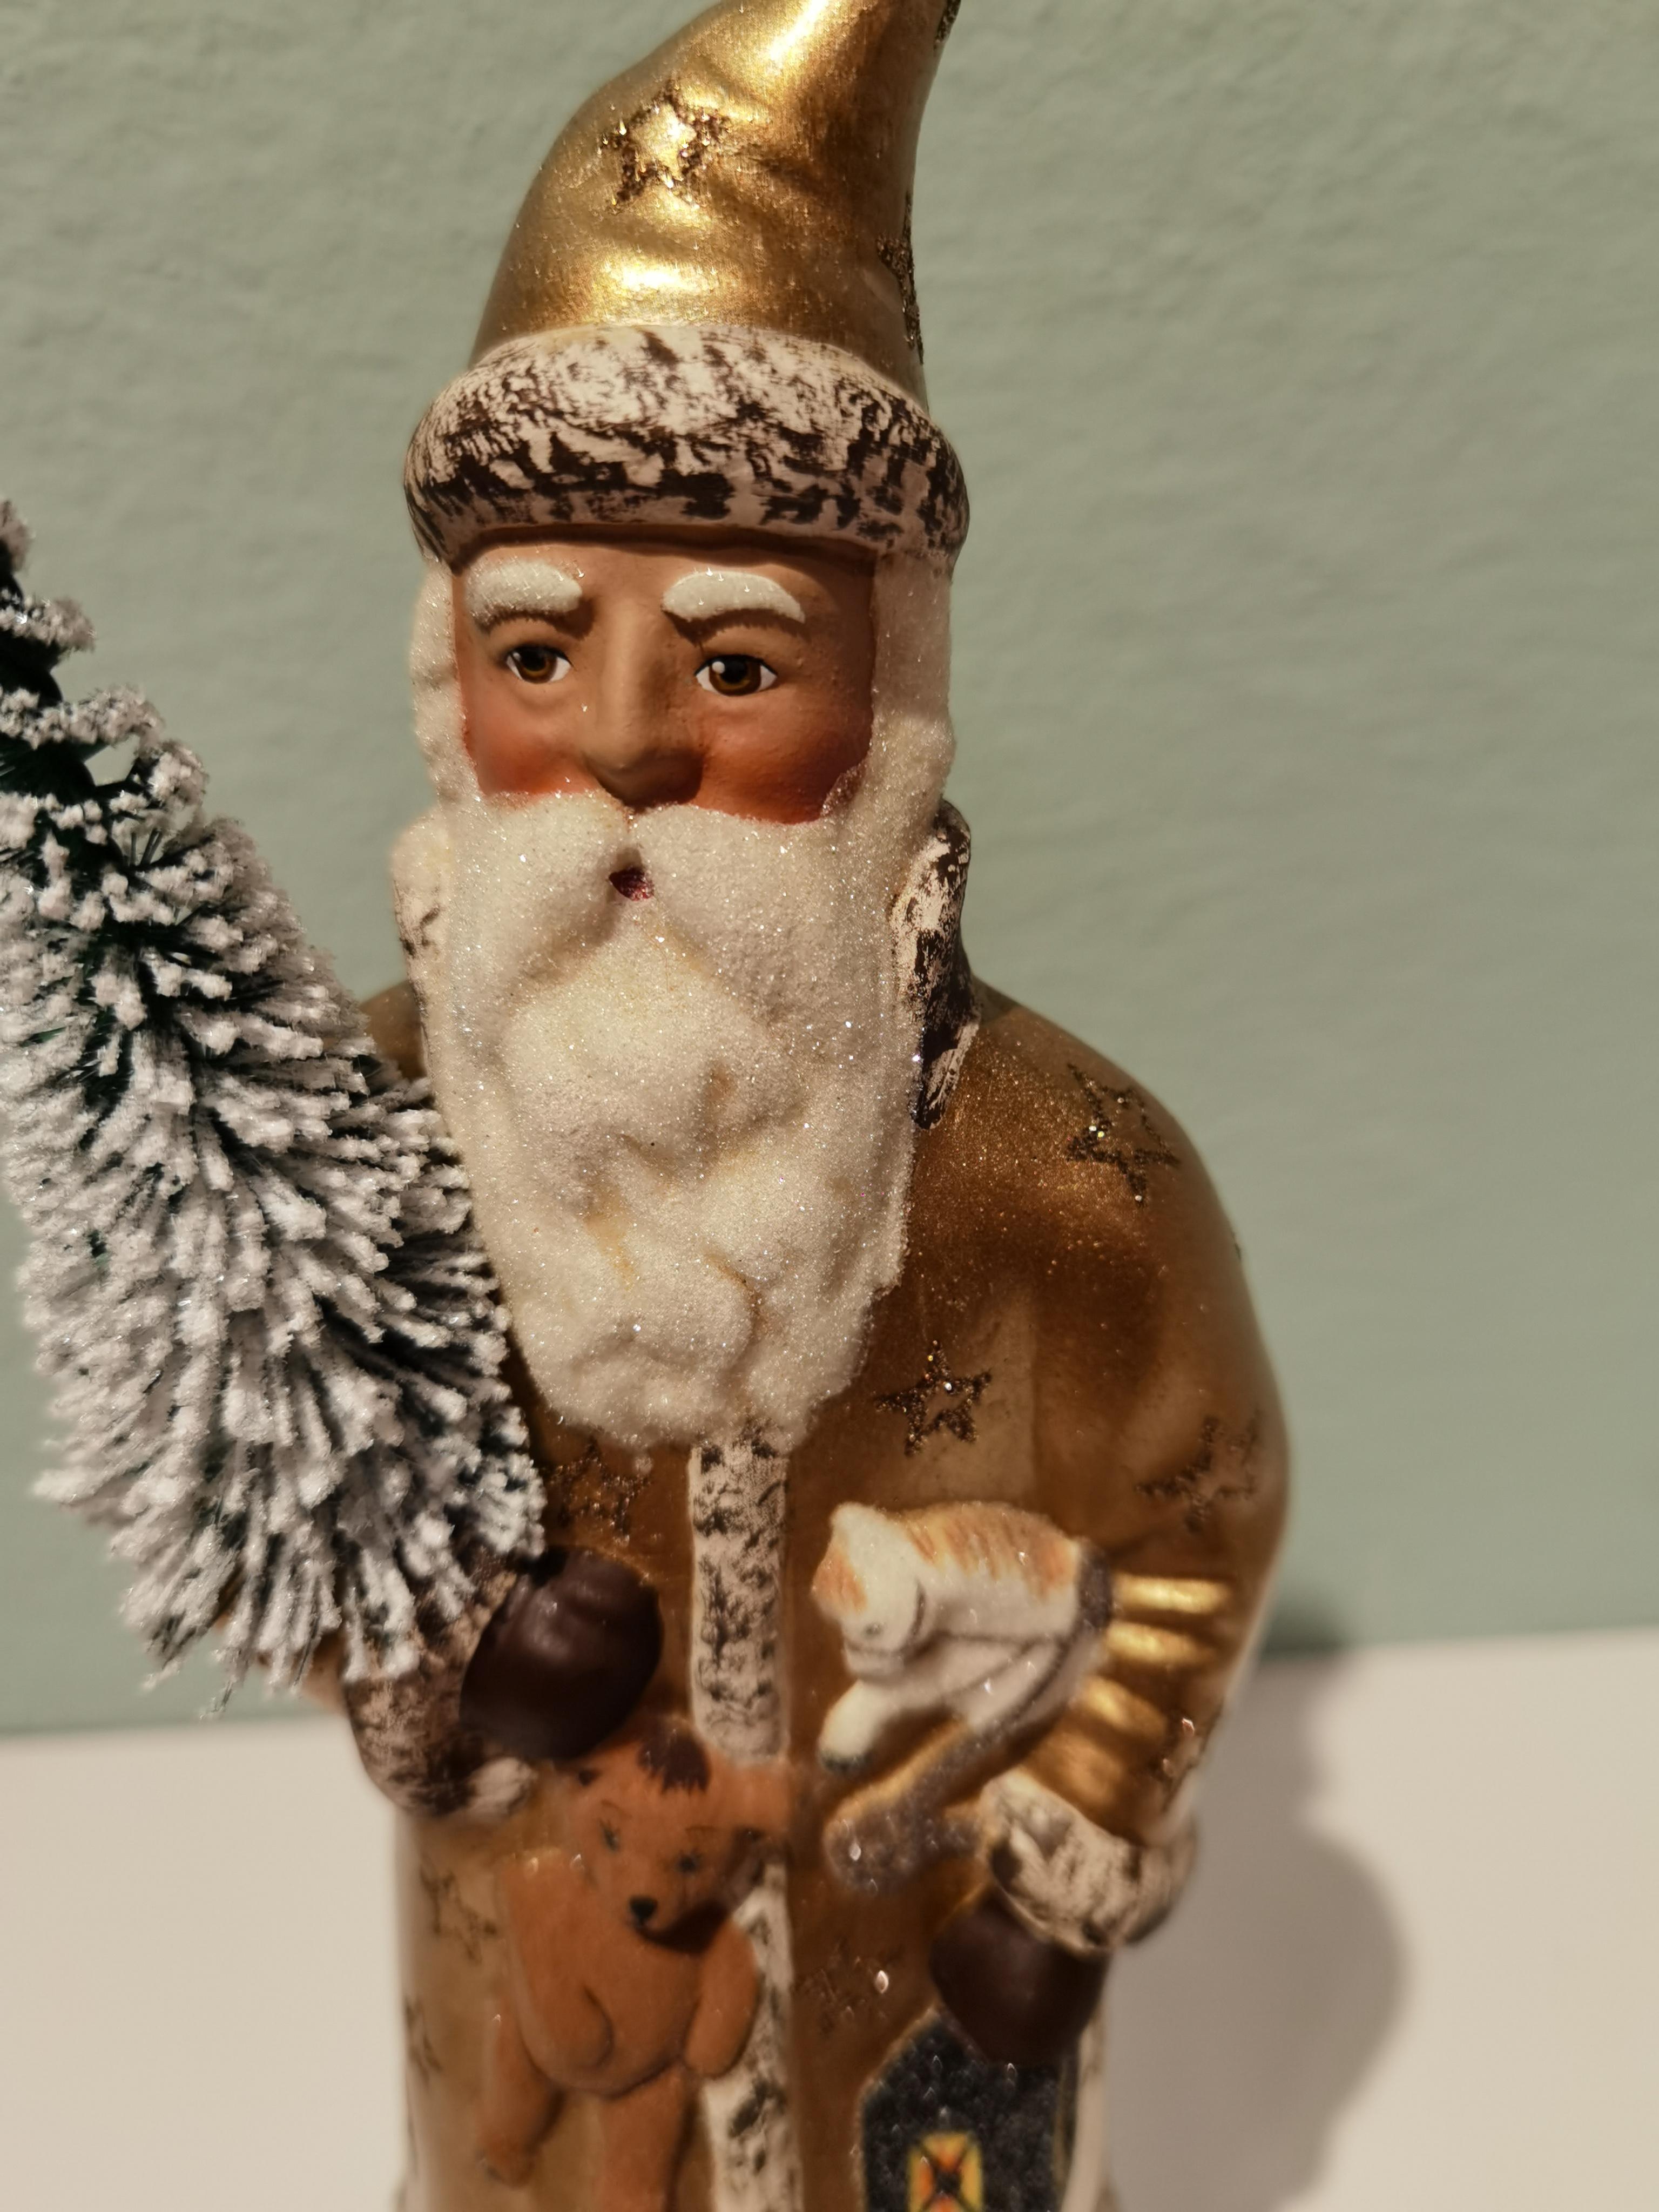 Santa Claus figure in hand painted gold papier mâché decorated with stars and a hand painted detailed face holding a tree. The Santa Claus is handmade in a original antique mould in Germany.